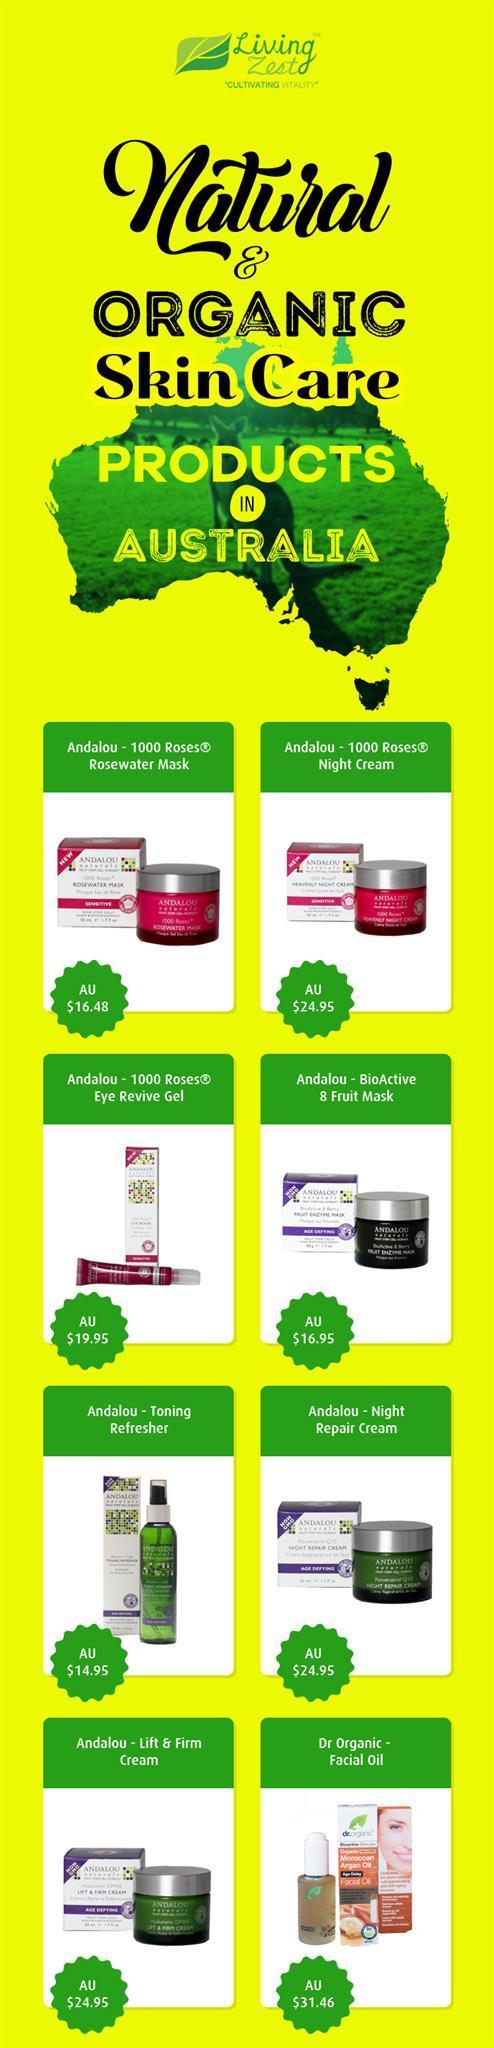 Shop Natural and Organic Skin Care Products in Australia from LivingZest